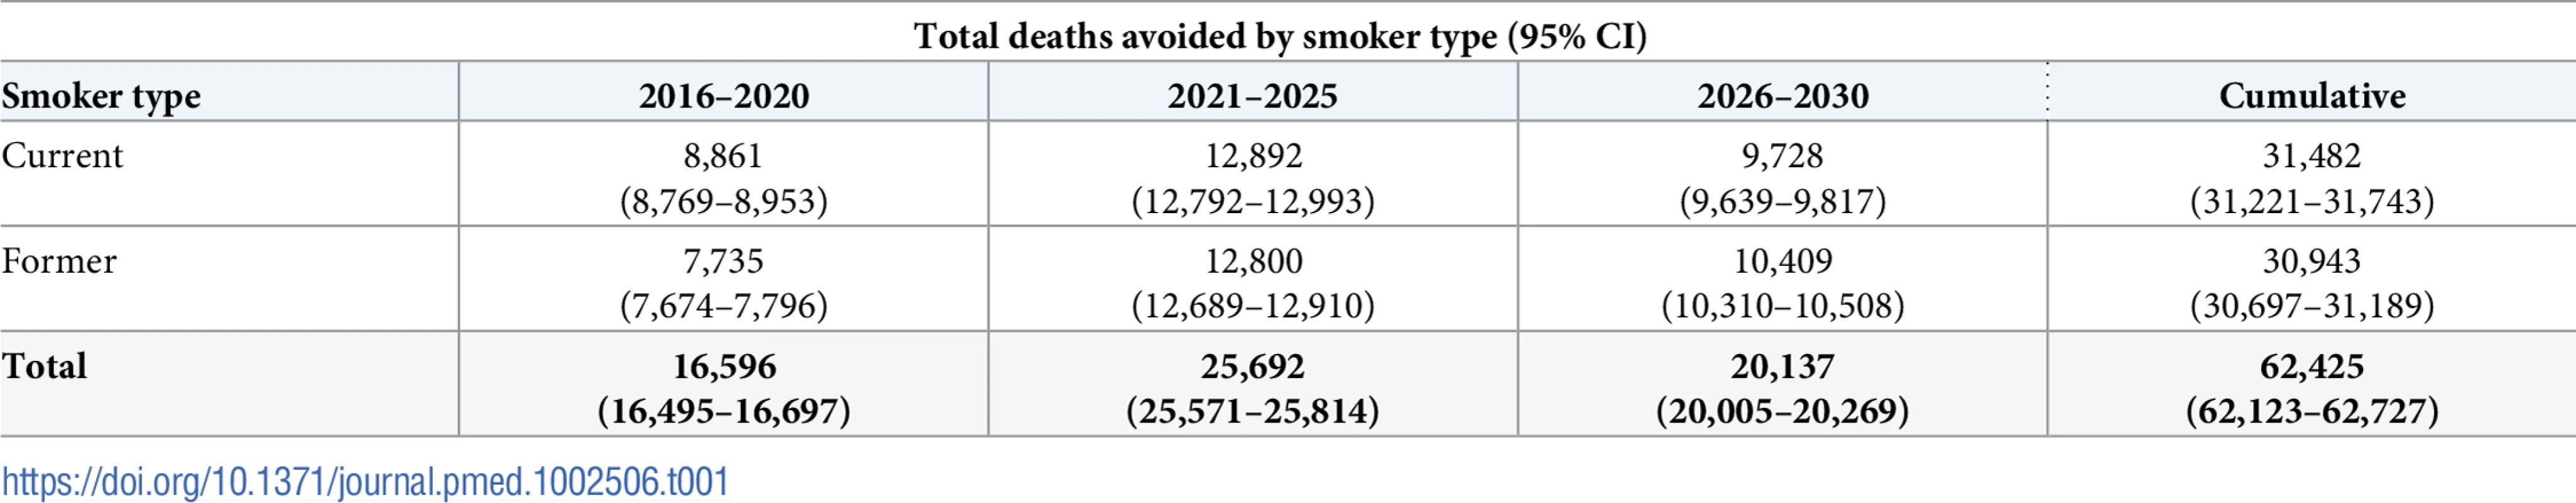 Estimated deaths avoided for current and former smokers compared to total population, 2016–2030.